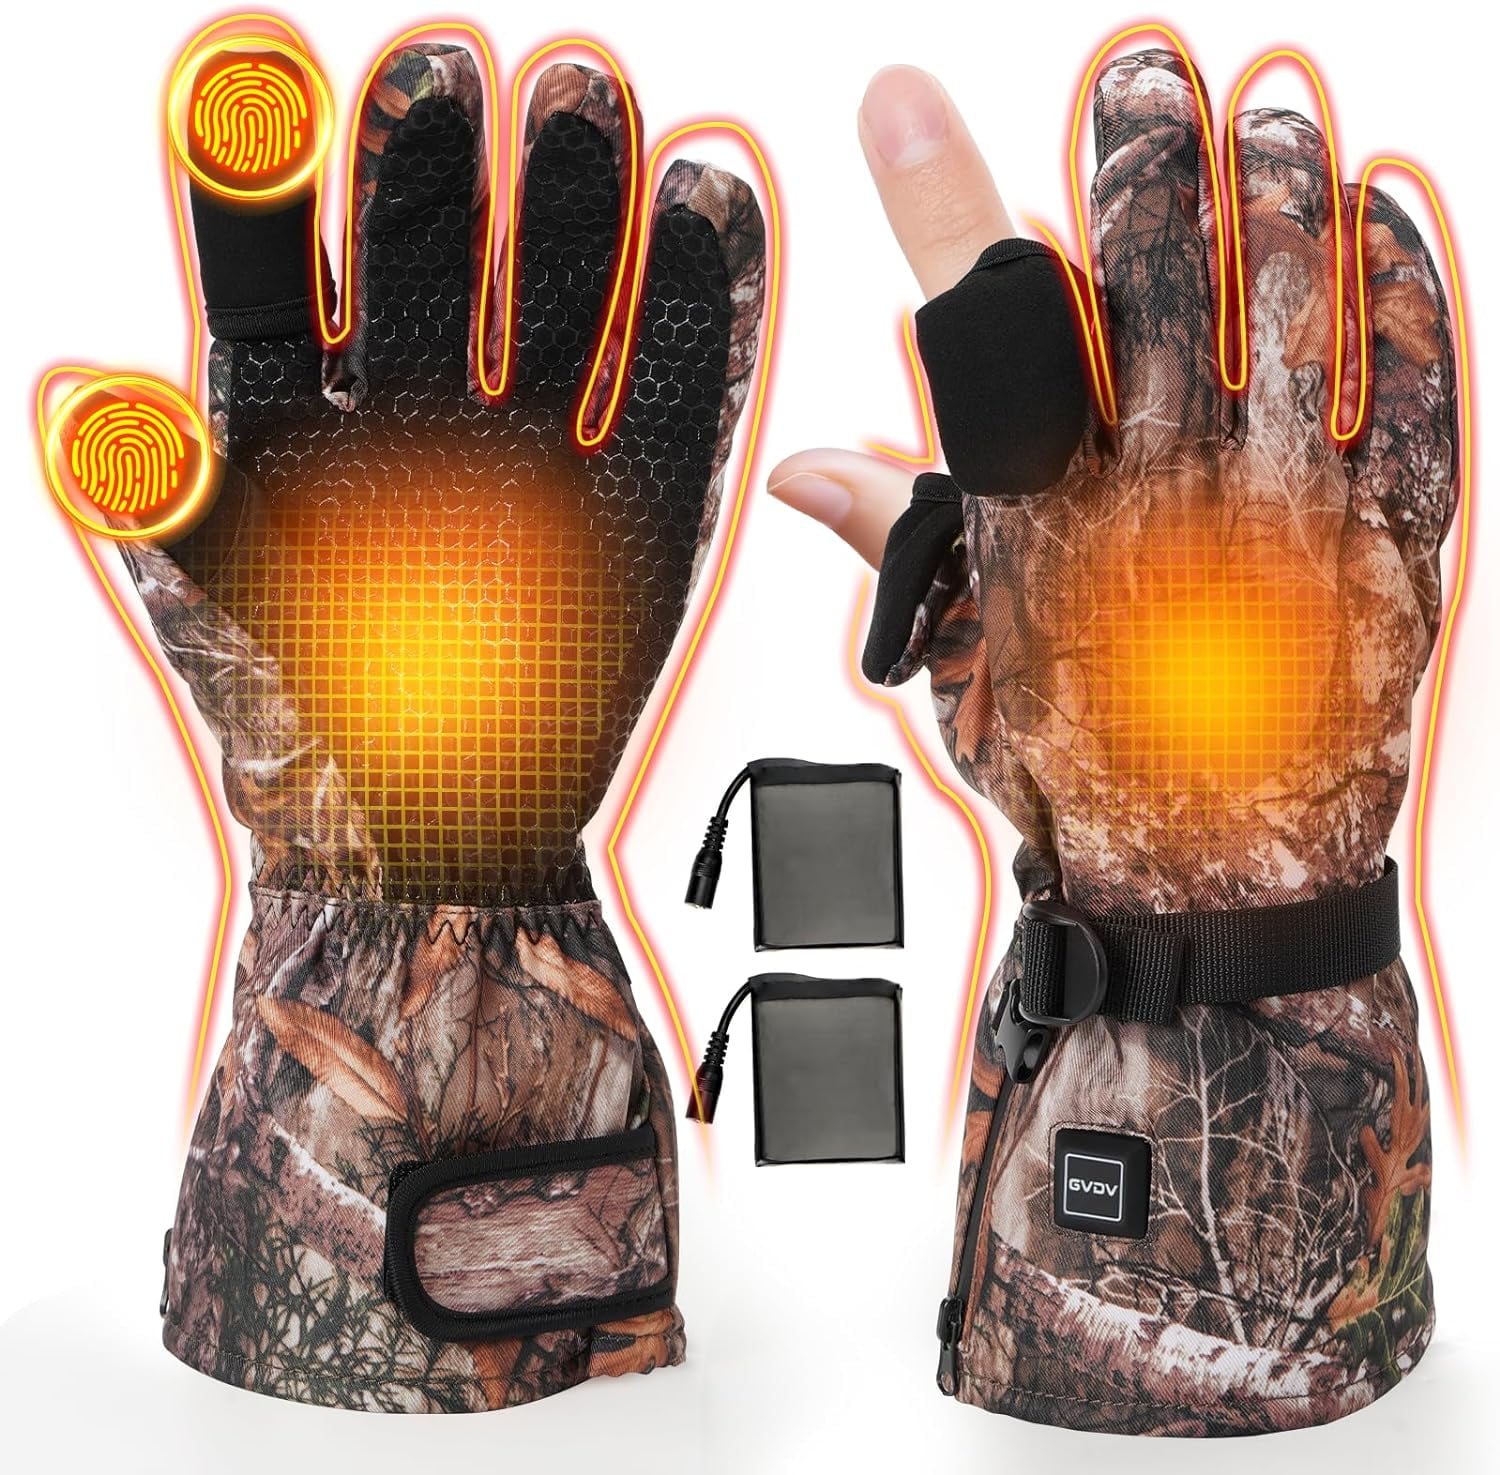 GVDV Hunting Heated Gloves for Men, Rechargeable Touch Screen Heating Gloves  with 2 Battery Packs, Winter Hand Warmers Glove for Outdoor Hunting Fishing  Shooting Hiking, Camouflage, XL 